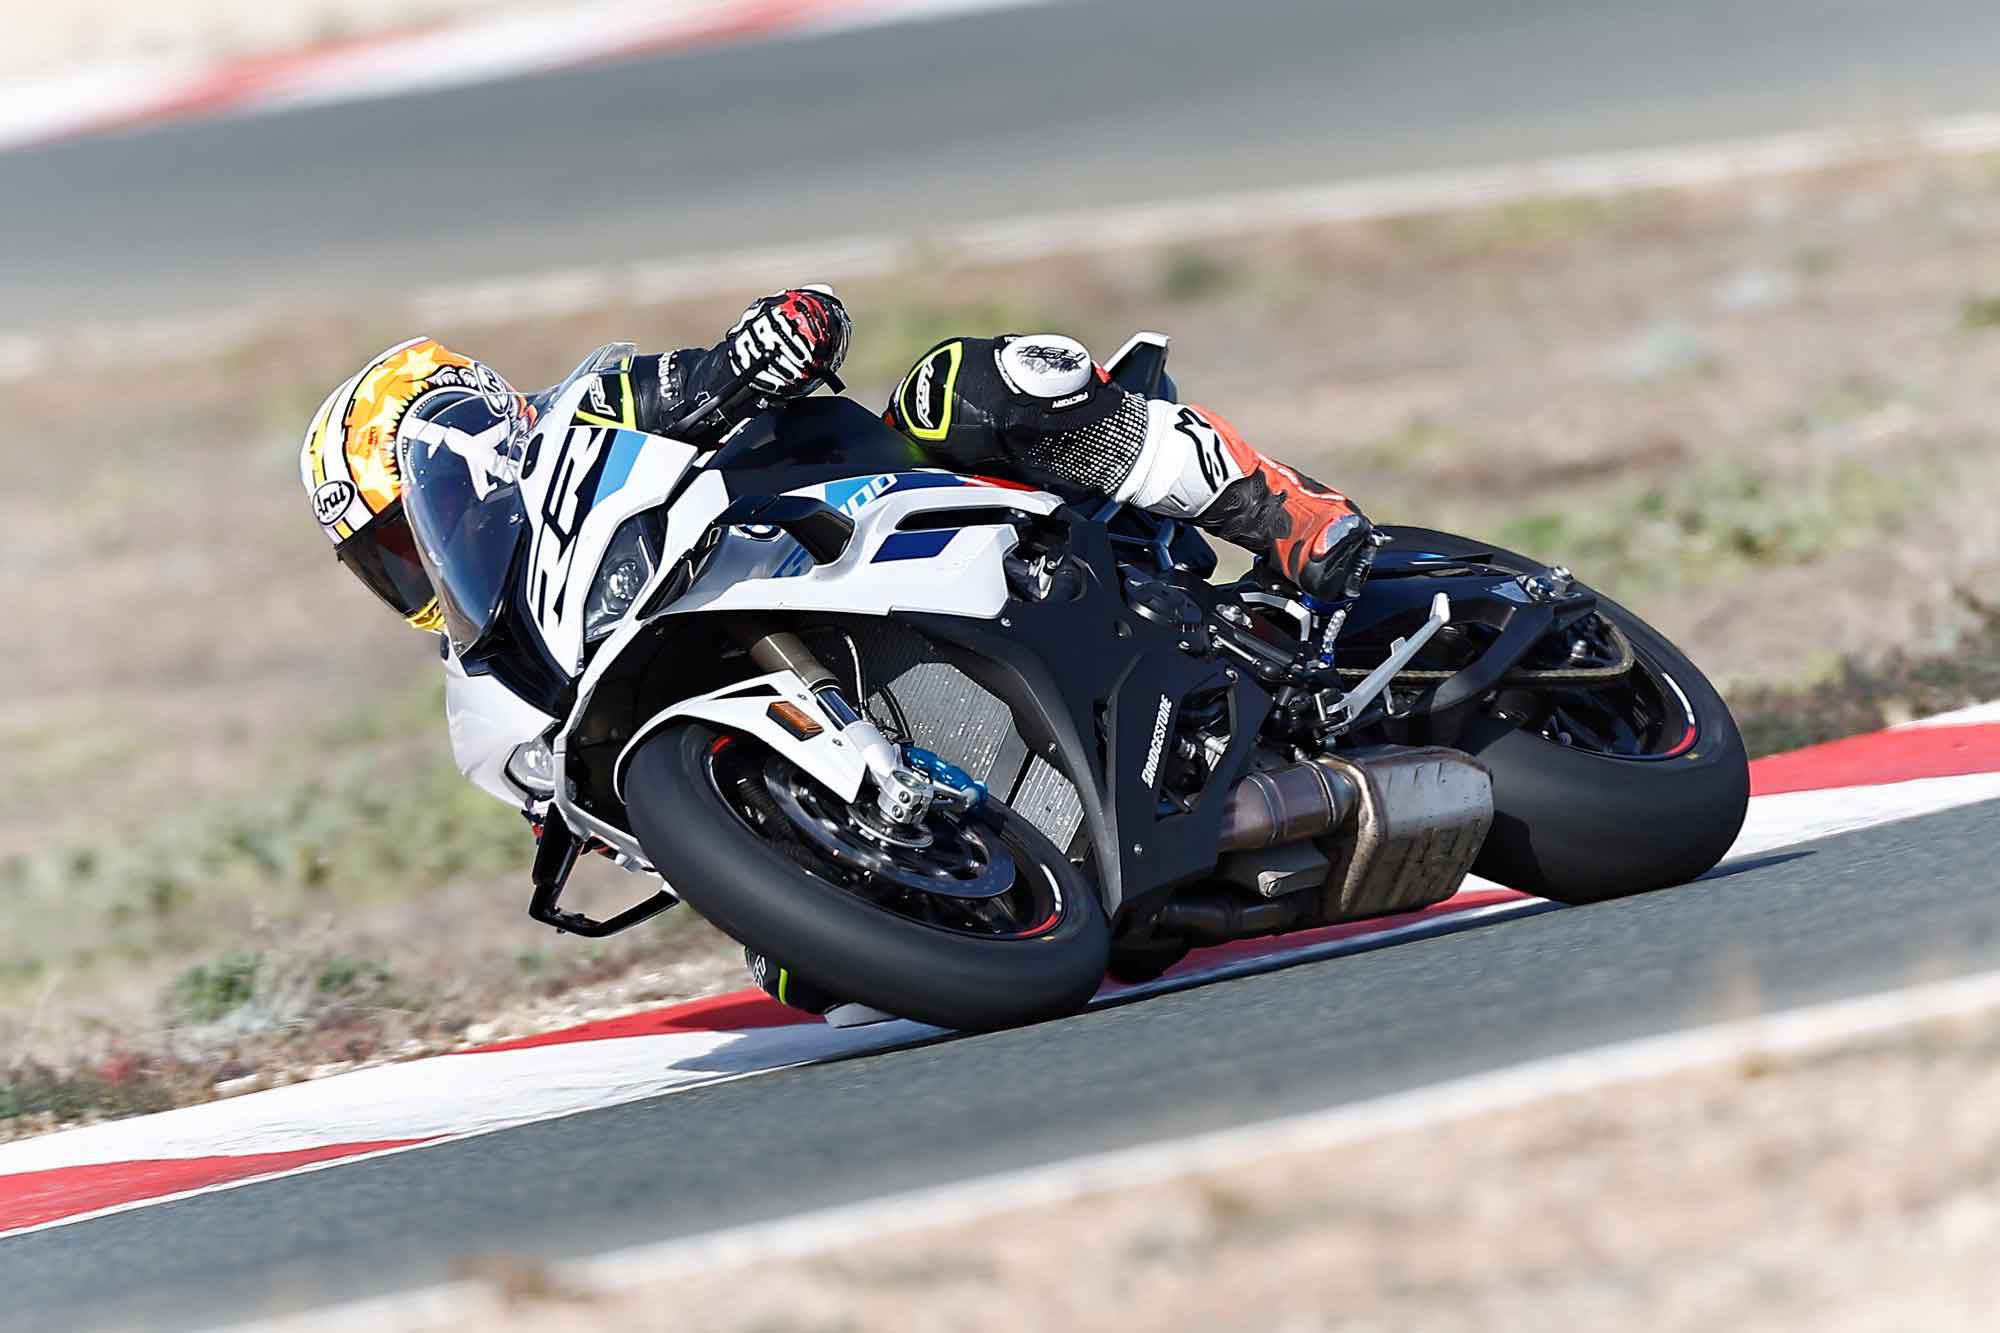 This was a track-only test in Almeria, southern Spain.